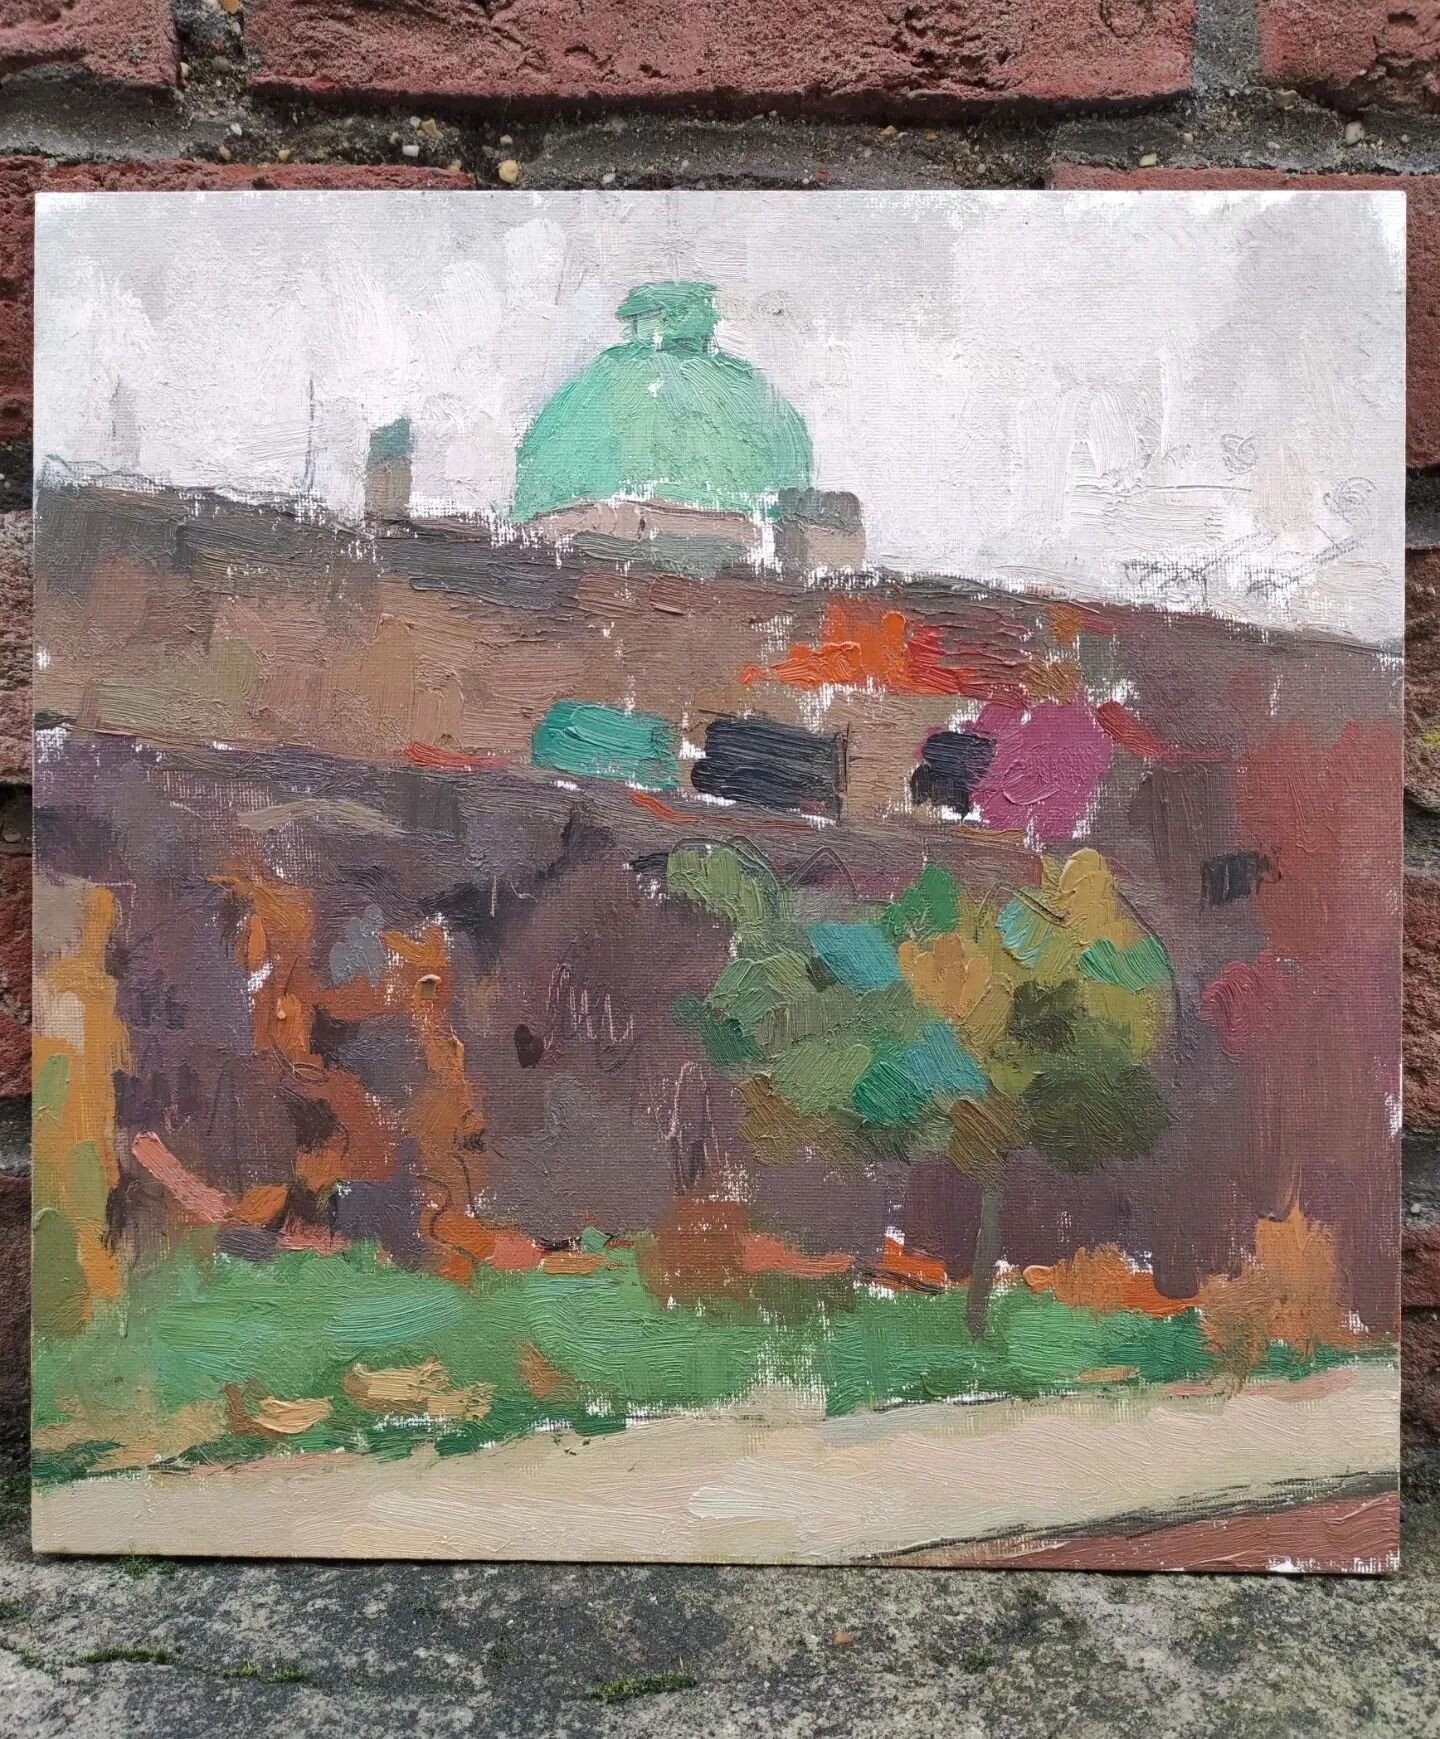 Admiralty Citadel. Honoured to be awarded &quot;The Cass Art Prize&quot; @royalinstituteofoilpaintersPaint Live 2022 for this painting. 

Painted between 2 and 4pm just outside @mallgalleries on 3 December 2022 in oils on an excellent medium grain W&